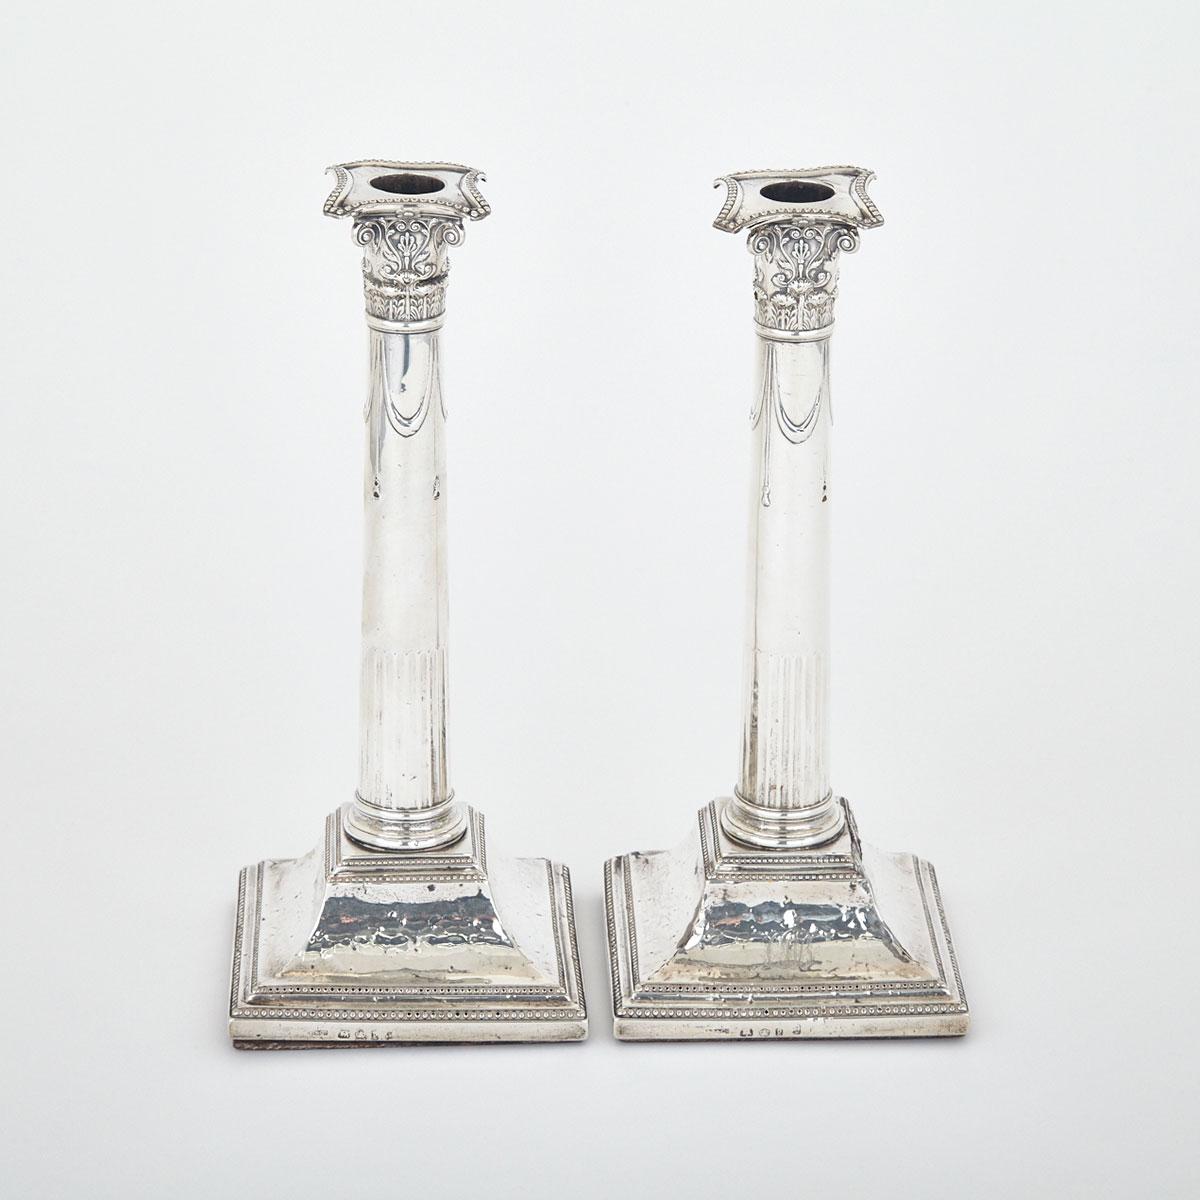 Pair of George III Silver Table Candlesticks, John Parsons & Co., Sheffield, 1785